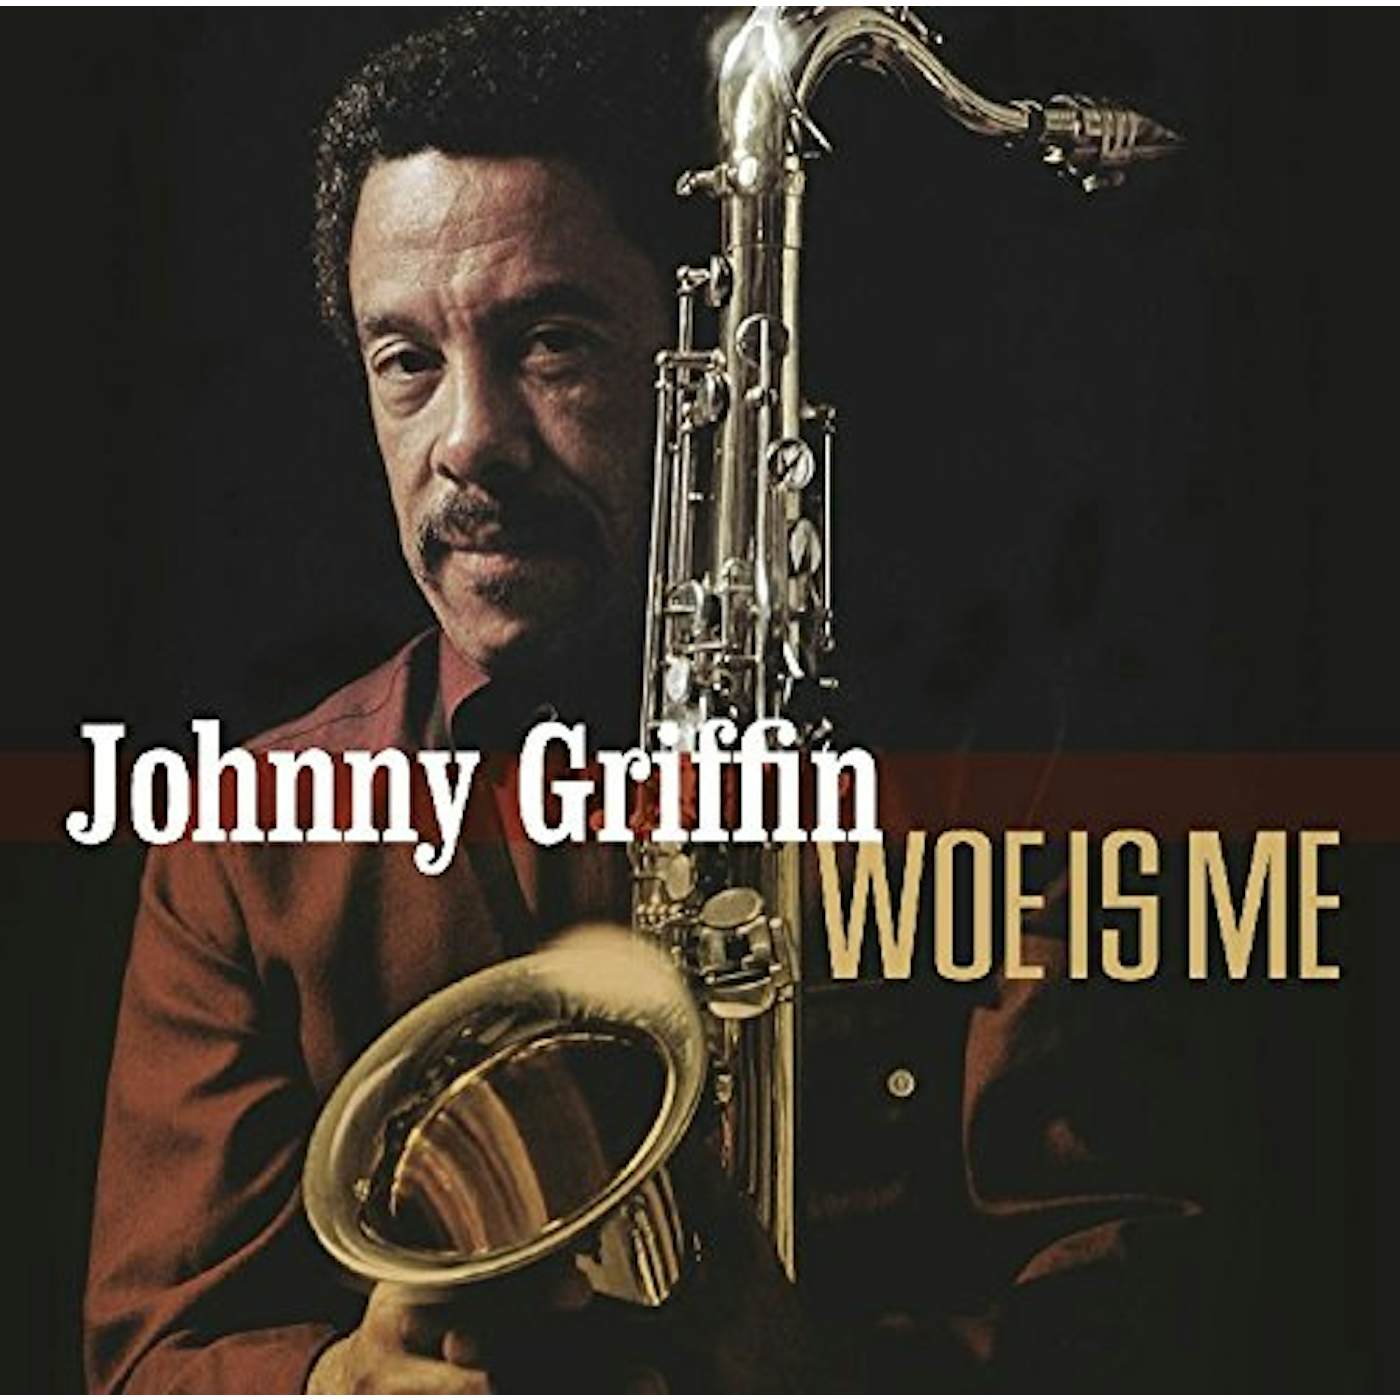 Johnny Griffin WOE IS ME CD